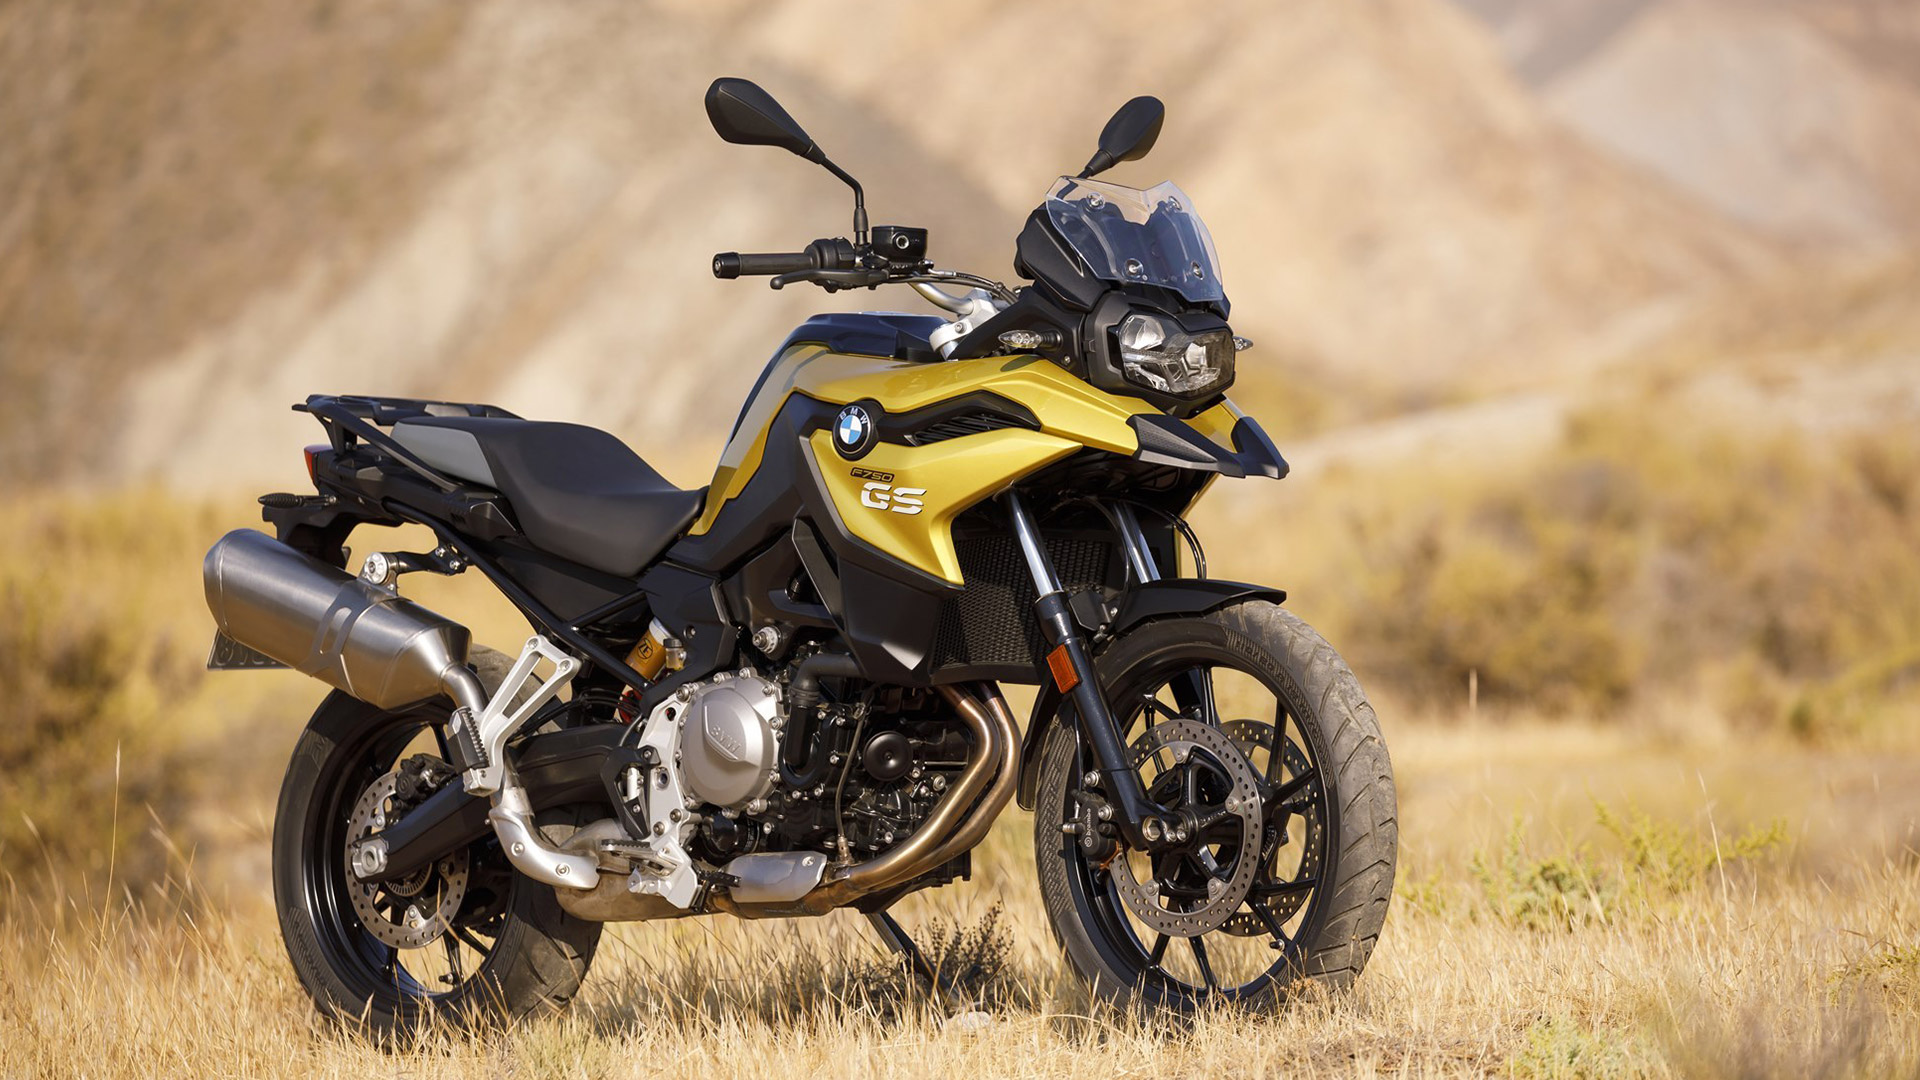 BMW F750 GS 2018 Price, Mileage, Reviews, Specification